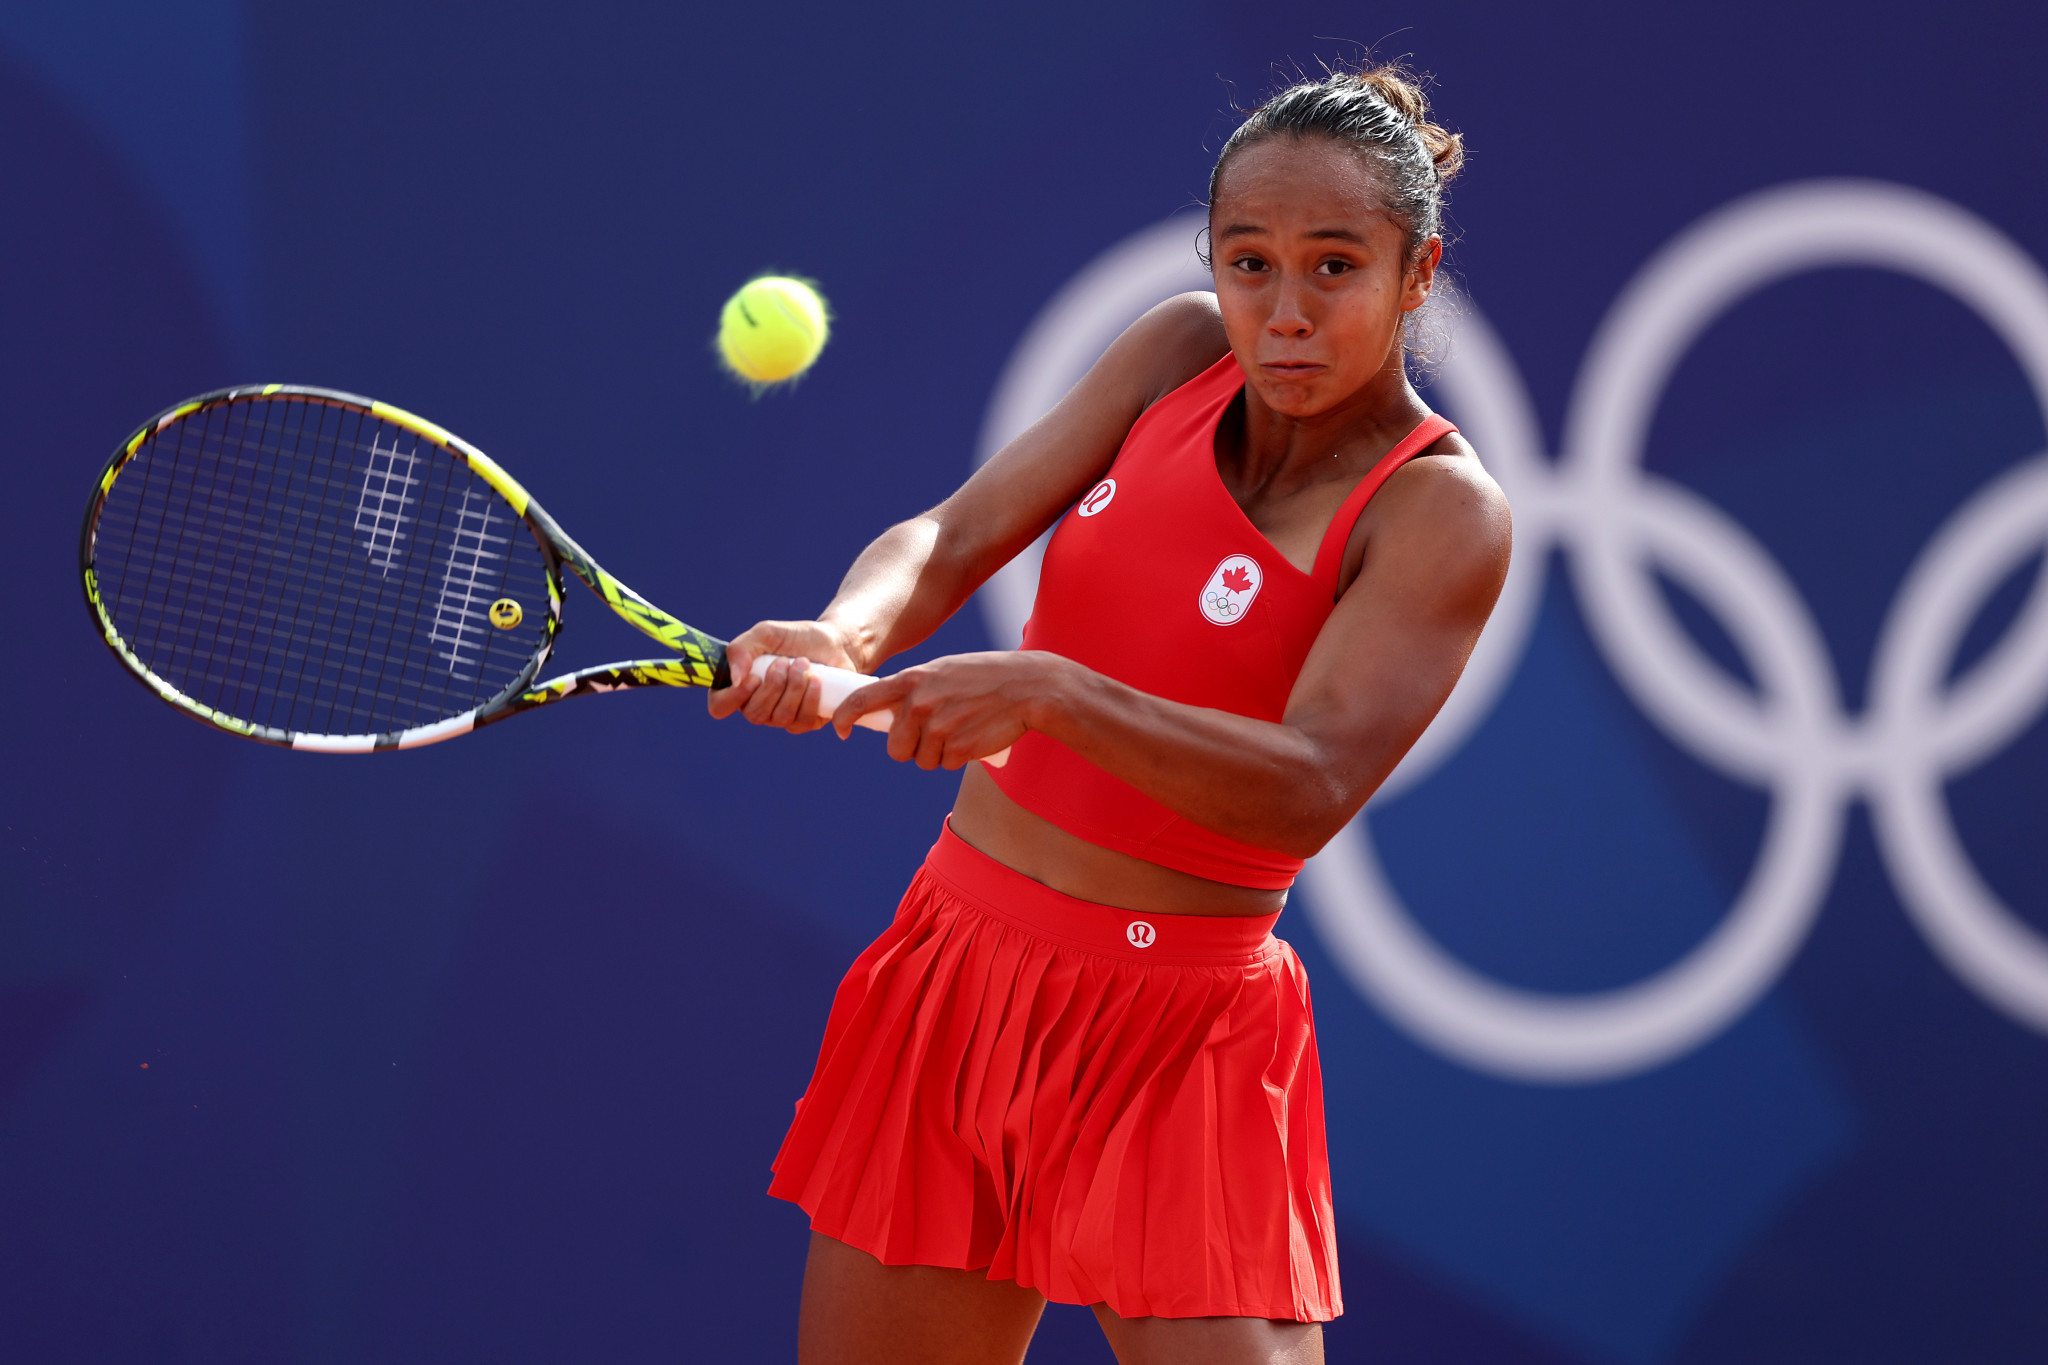 There was a win for Canada's Leylah Fernandez who beat Spain's Cristina Bucsa. GETTY IMAGES